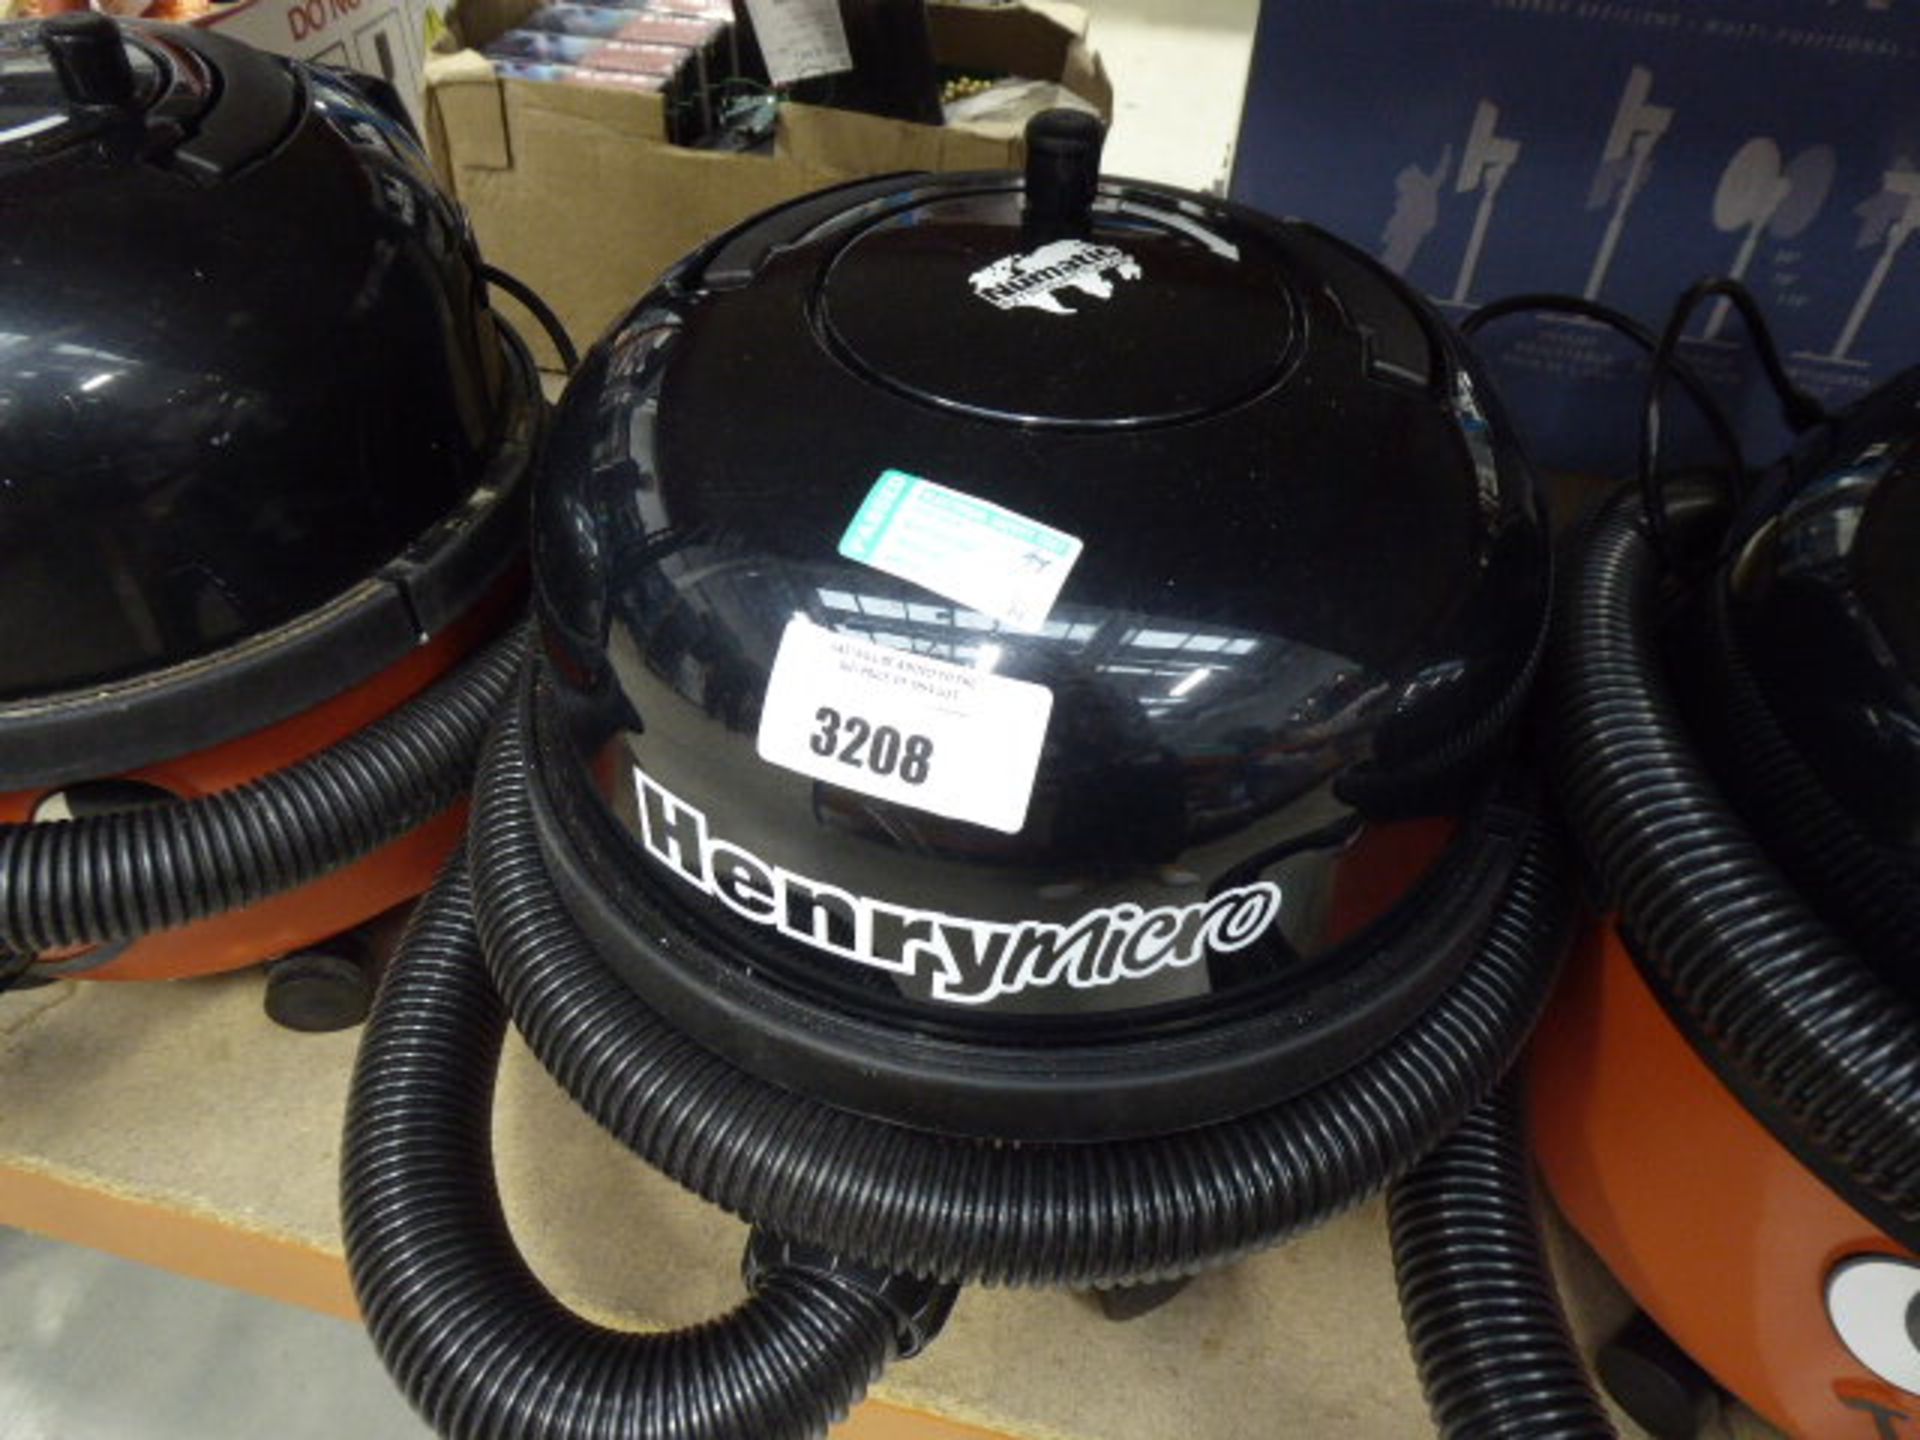 (33) Henry Micro Vacuum cleaner with a pole